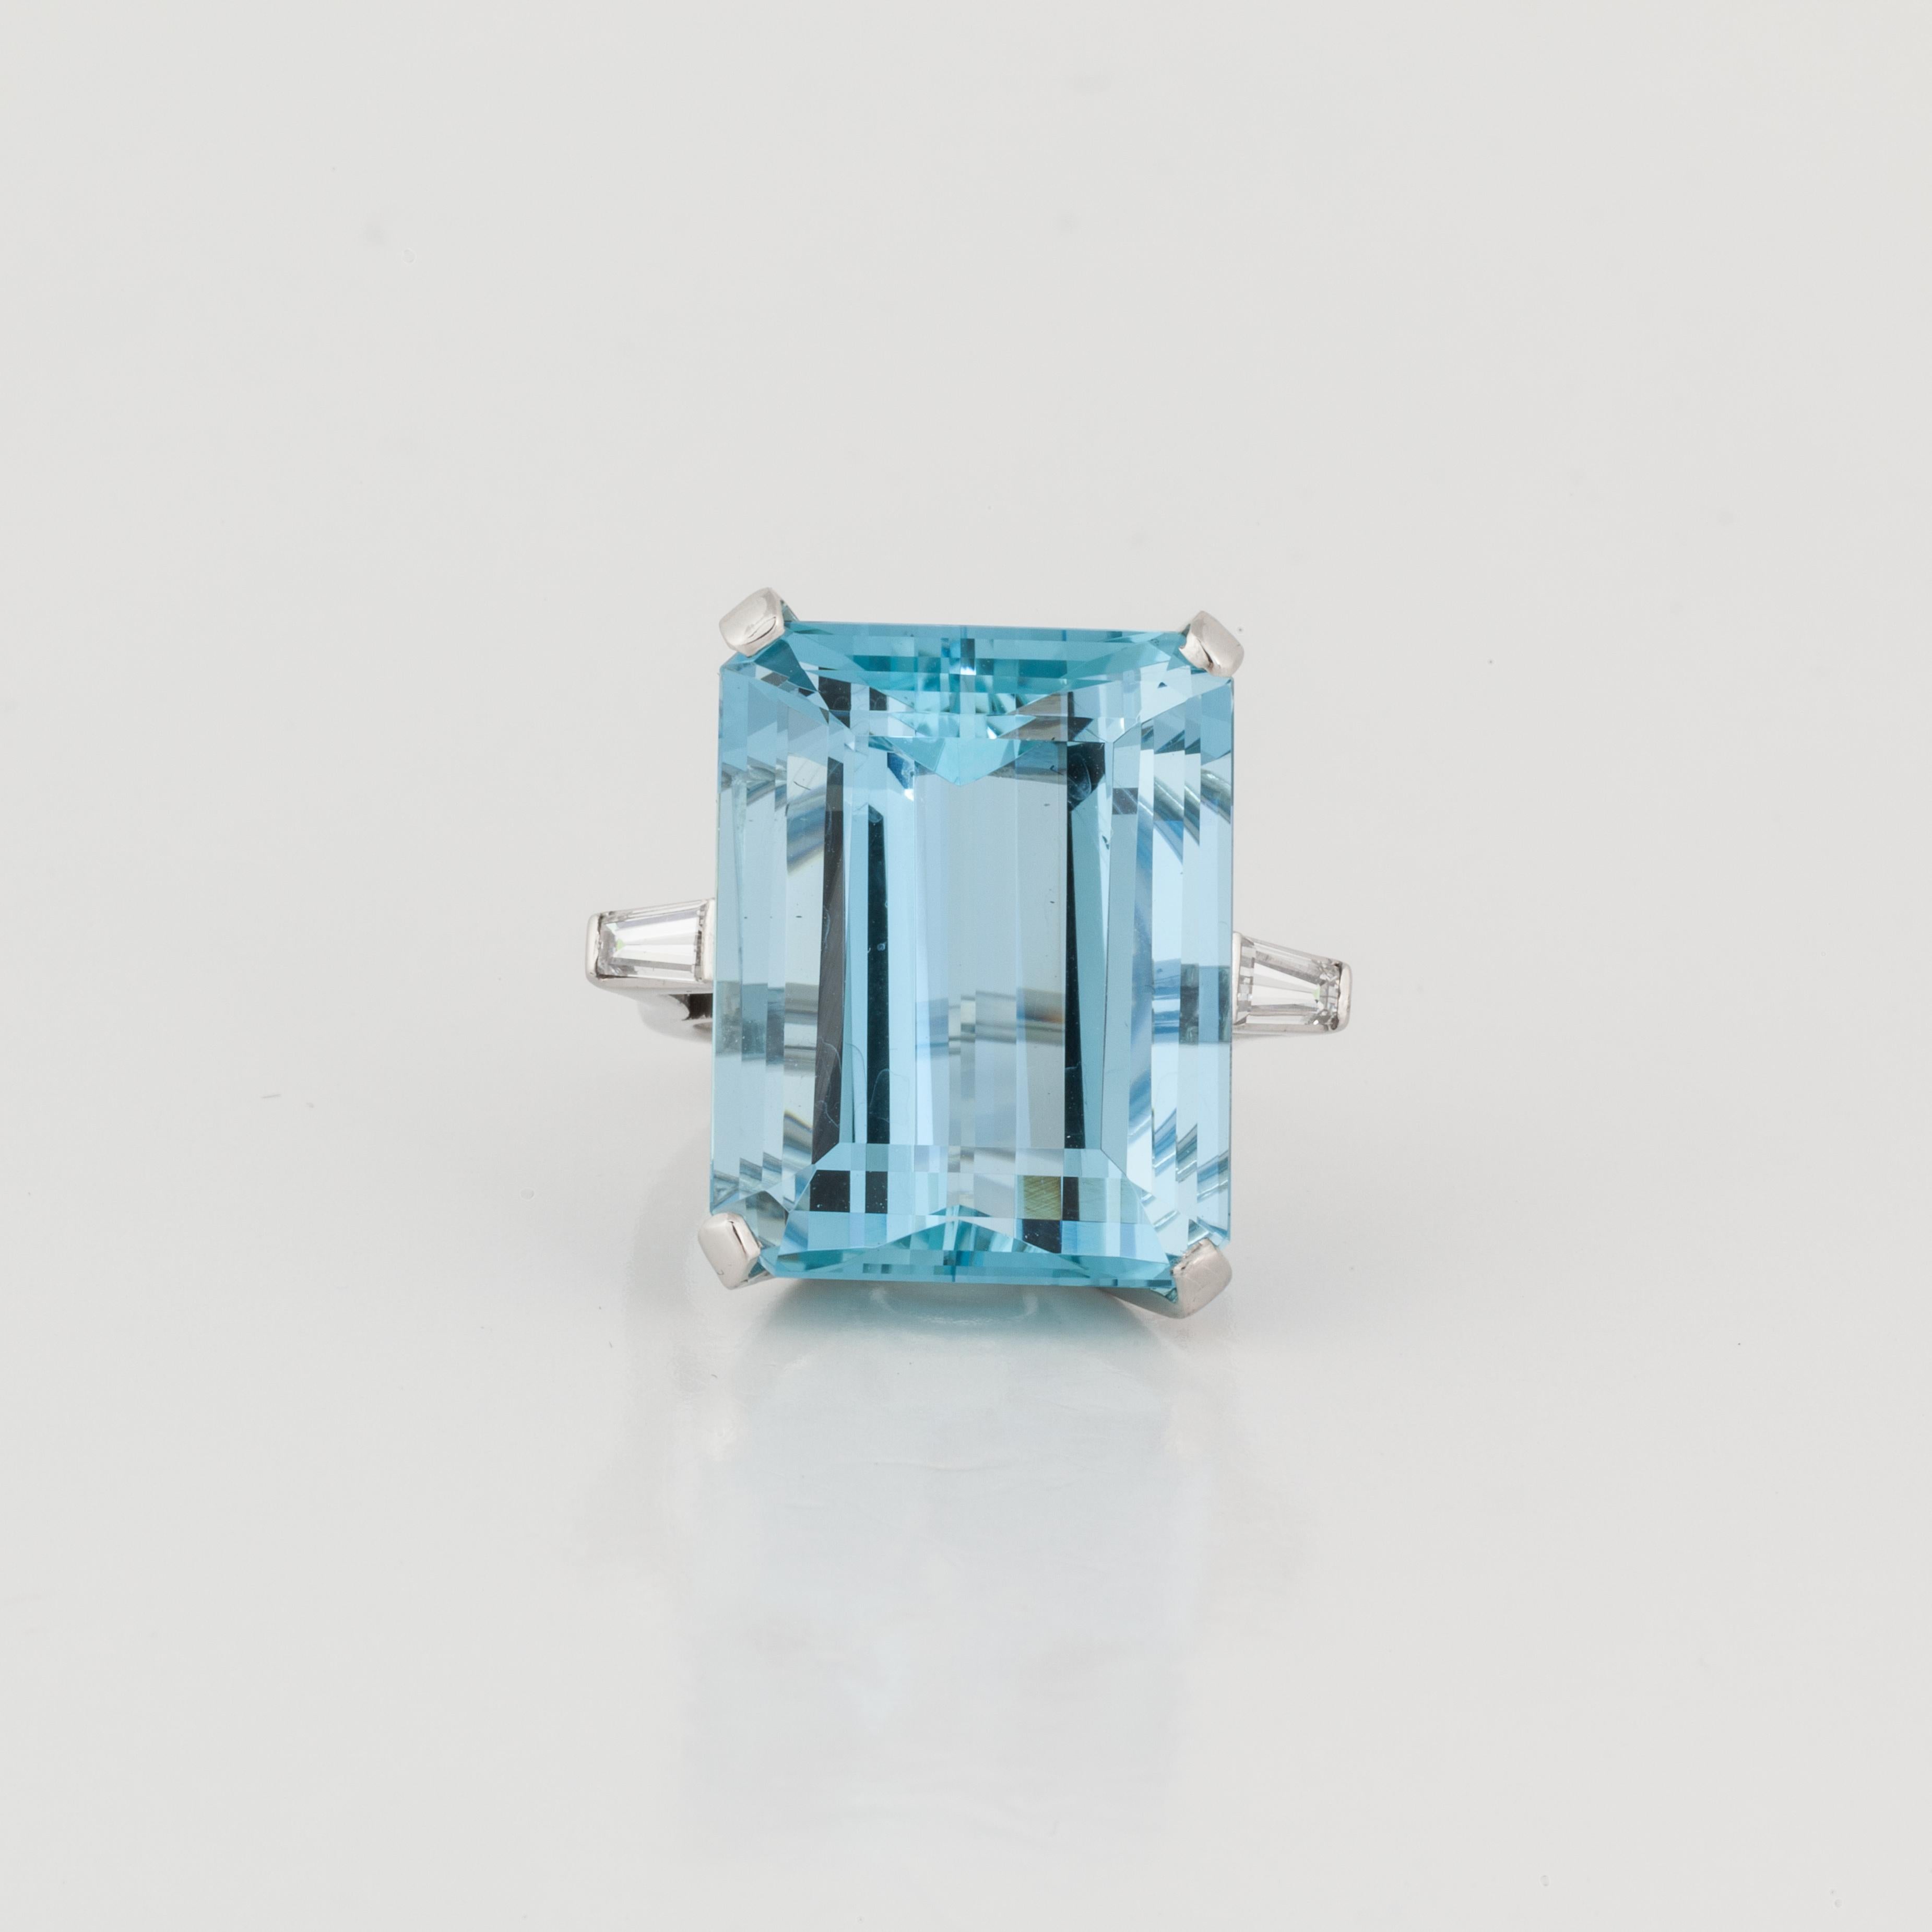 Platinum ring featuring a rectangular-cut aquamarine accented by diamonds.  The aquamarine totals 35.80 carats, with two tapered baguette diamonds totaling 0.60 carats; H-I color and VS clarity.  The ring is currently a size 7 1/4, and may be sized.